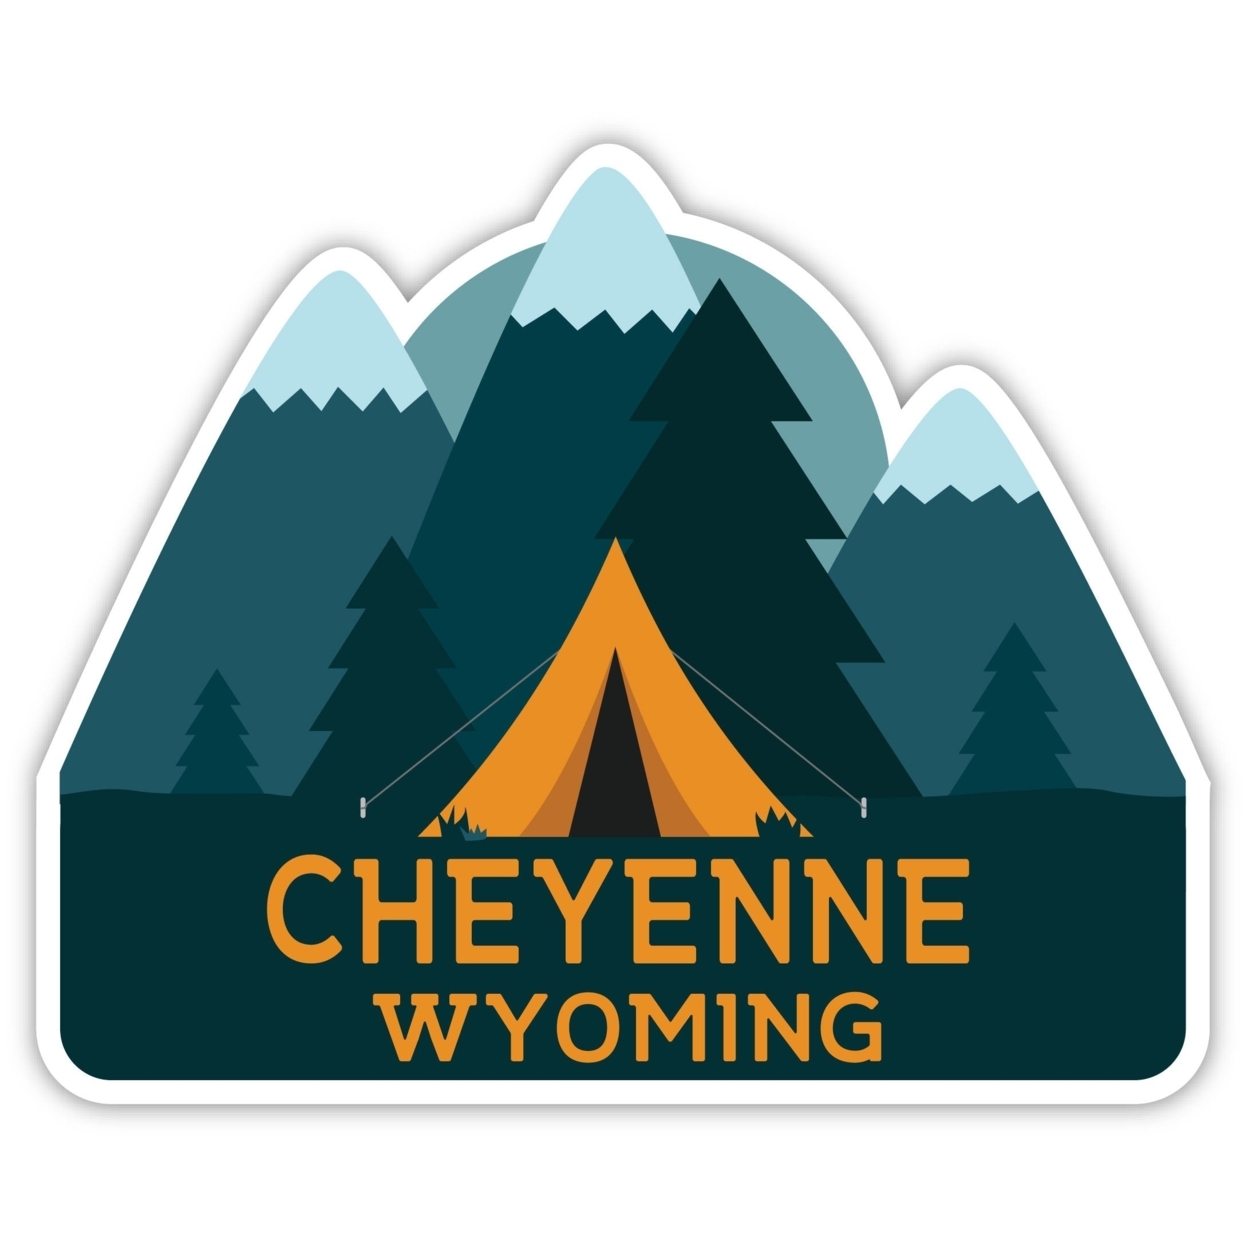 Cheyenne Wyoming Souvenir Decorative Stickers (Choose Theme And Size) - 4-Pack, 2-Inch, Bear